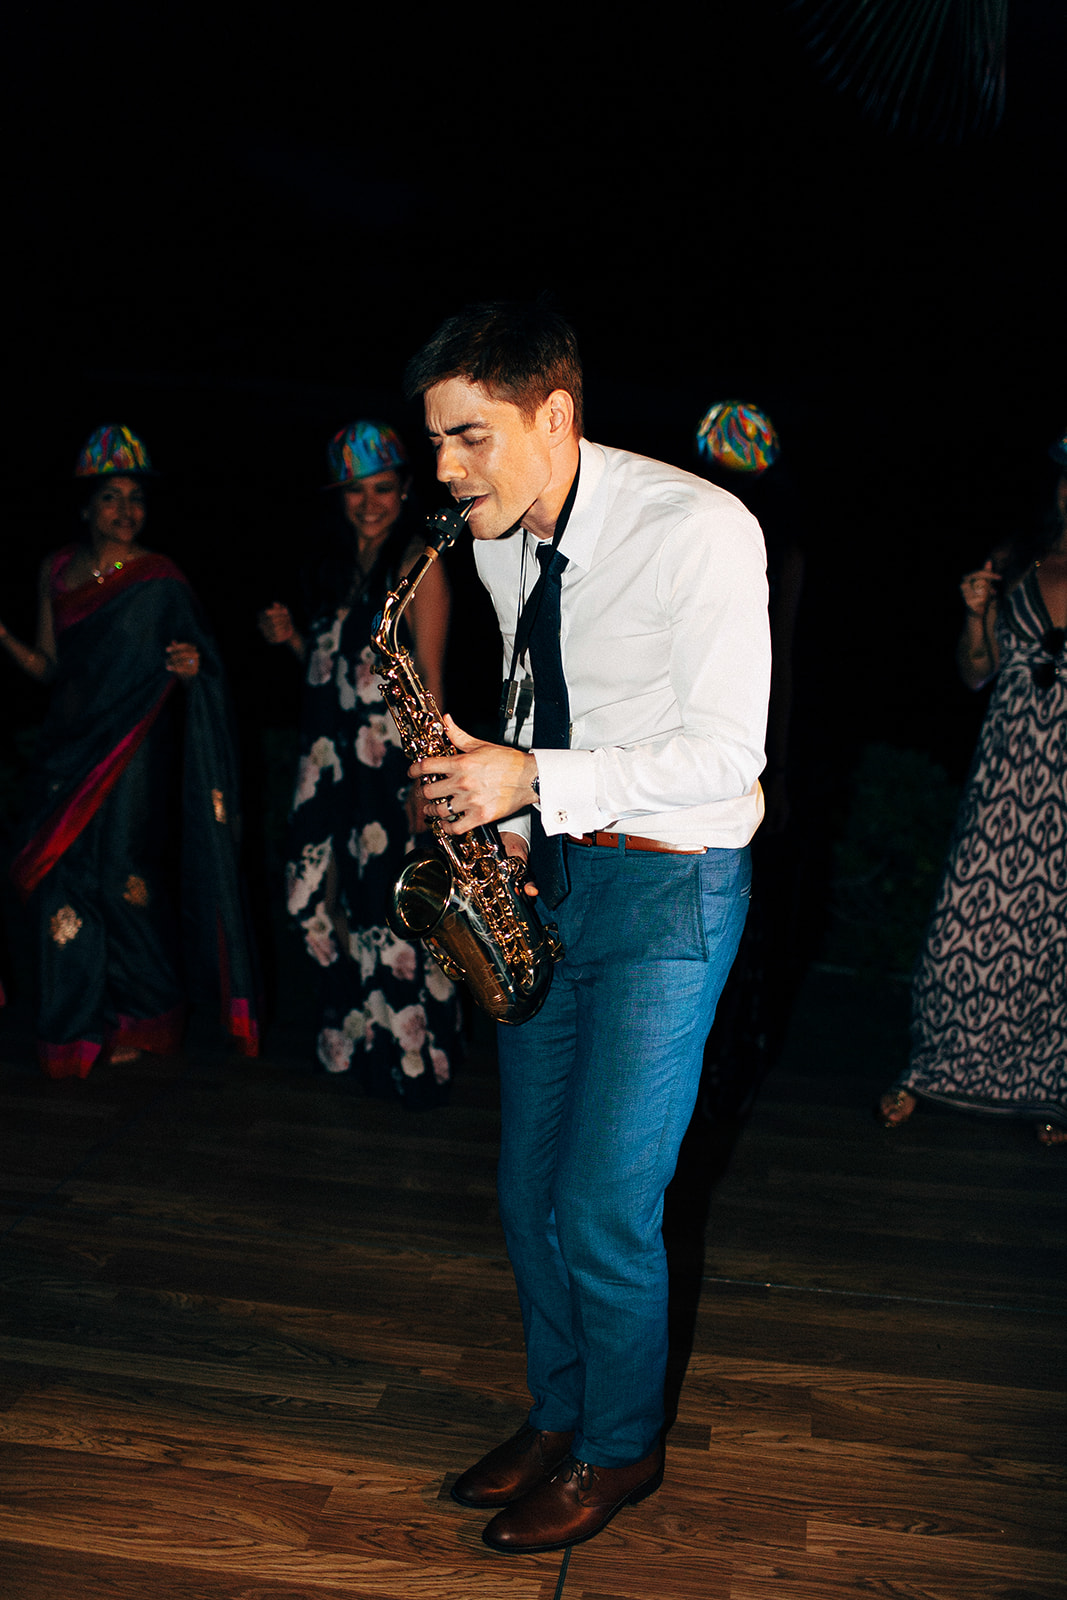 Groom plays the sax for his new bride at their Maui wedding